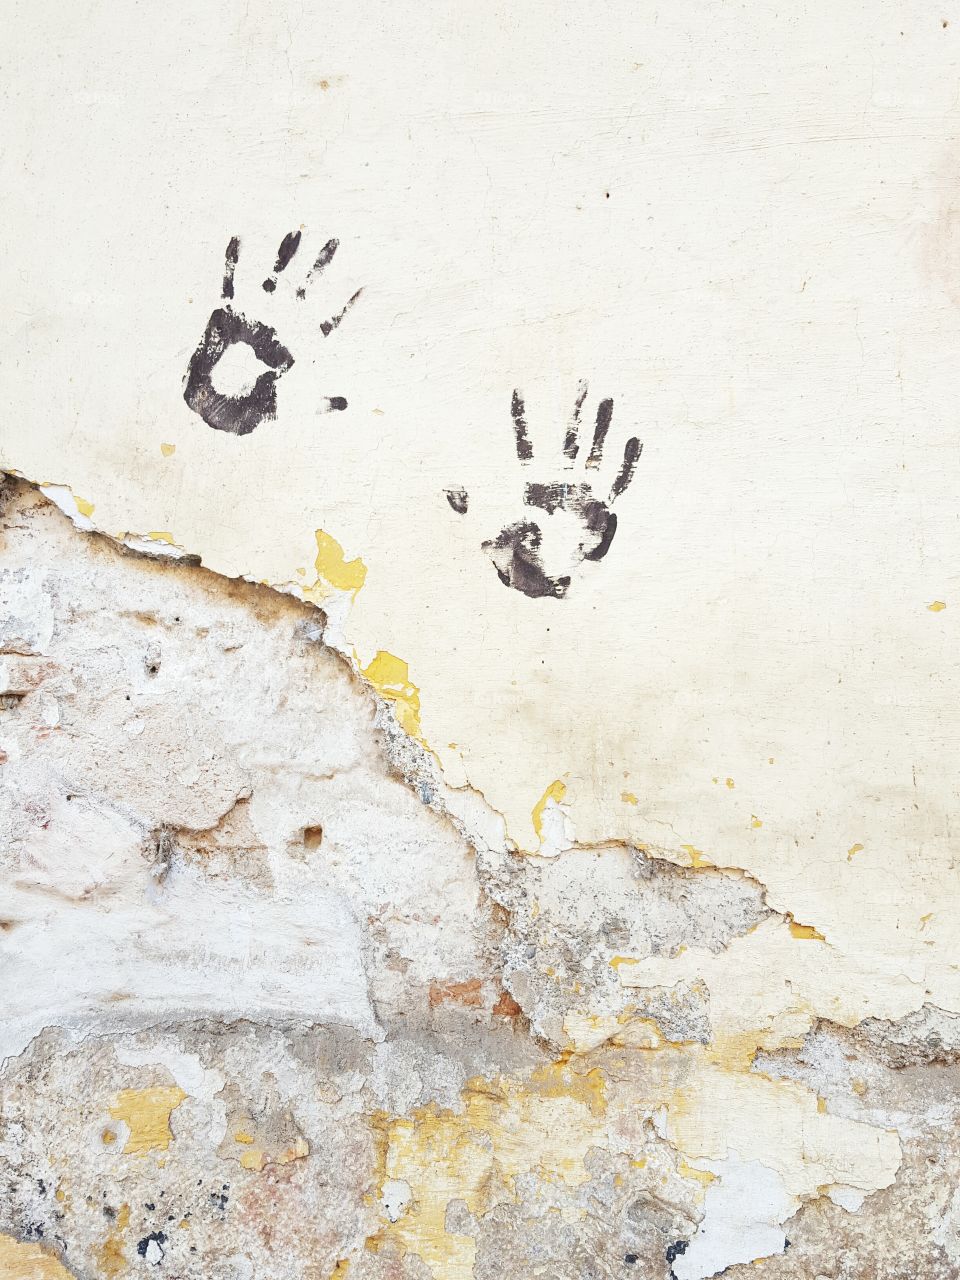 Handprints on an old wall